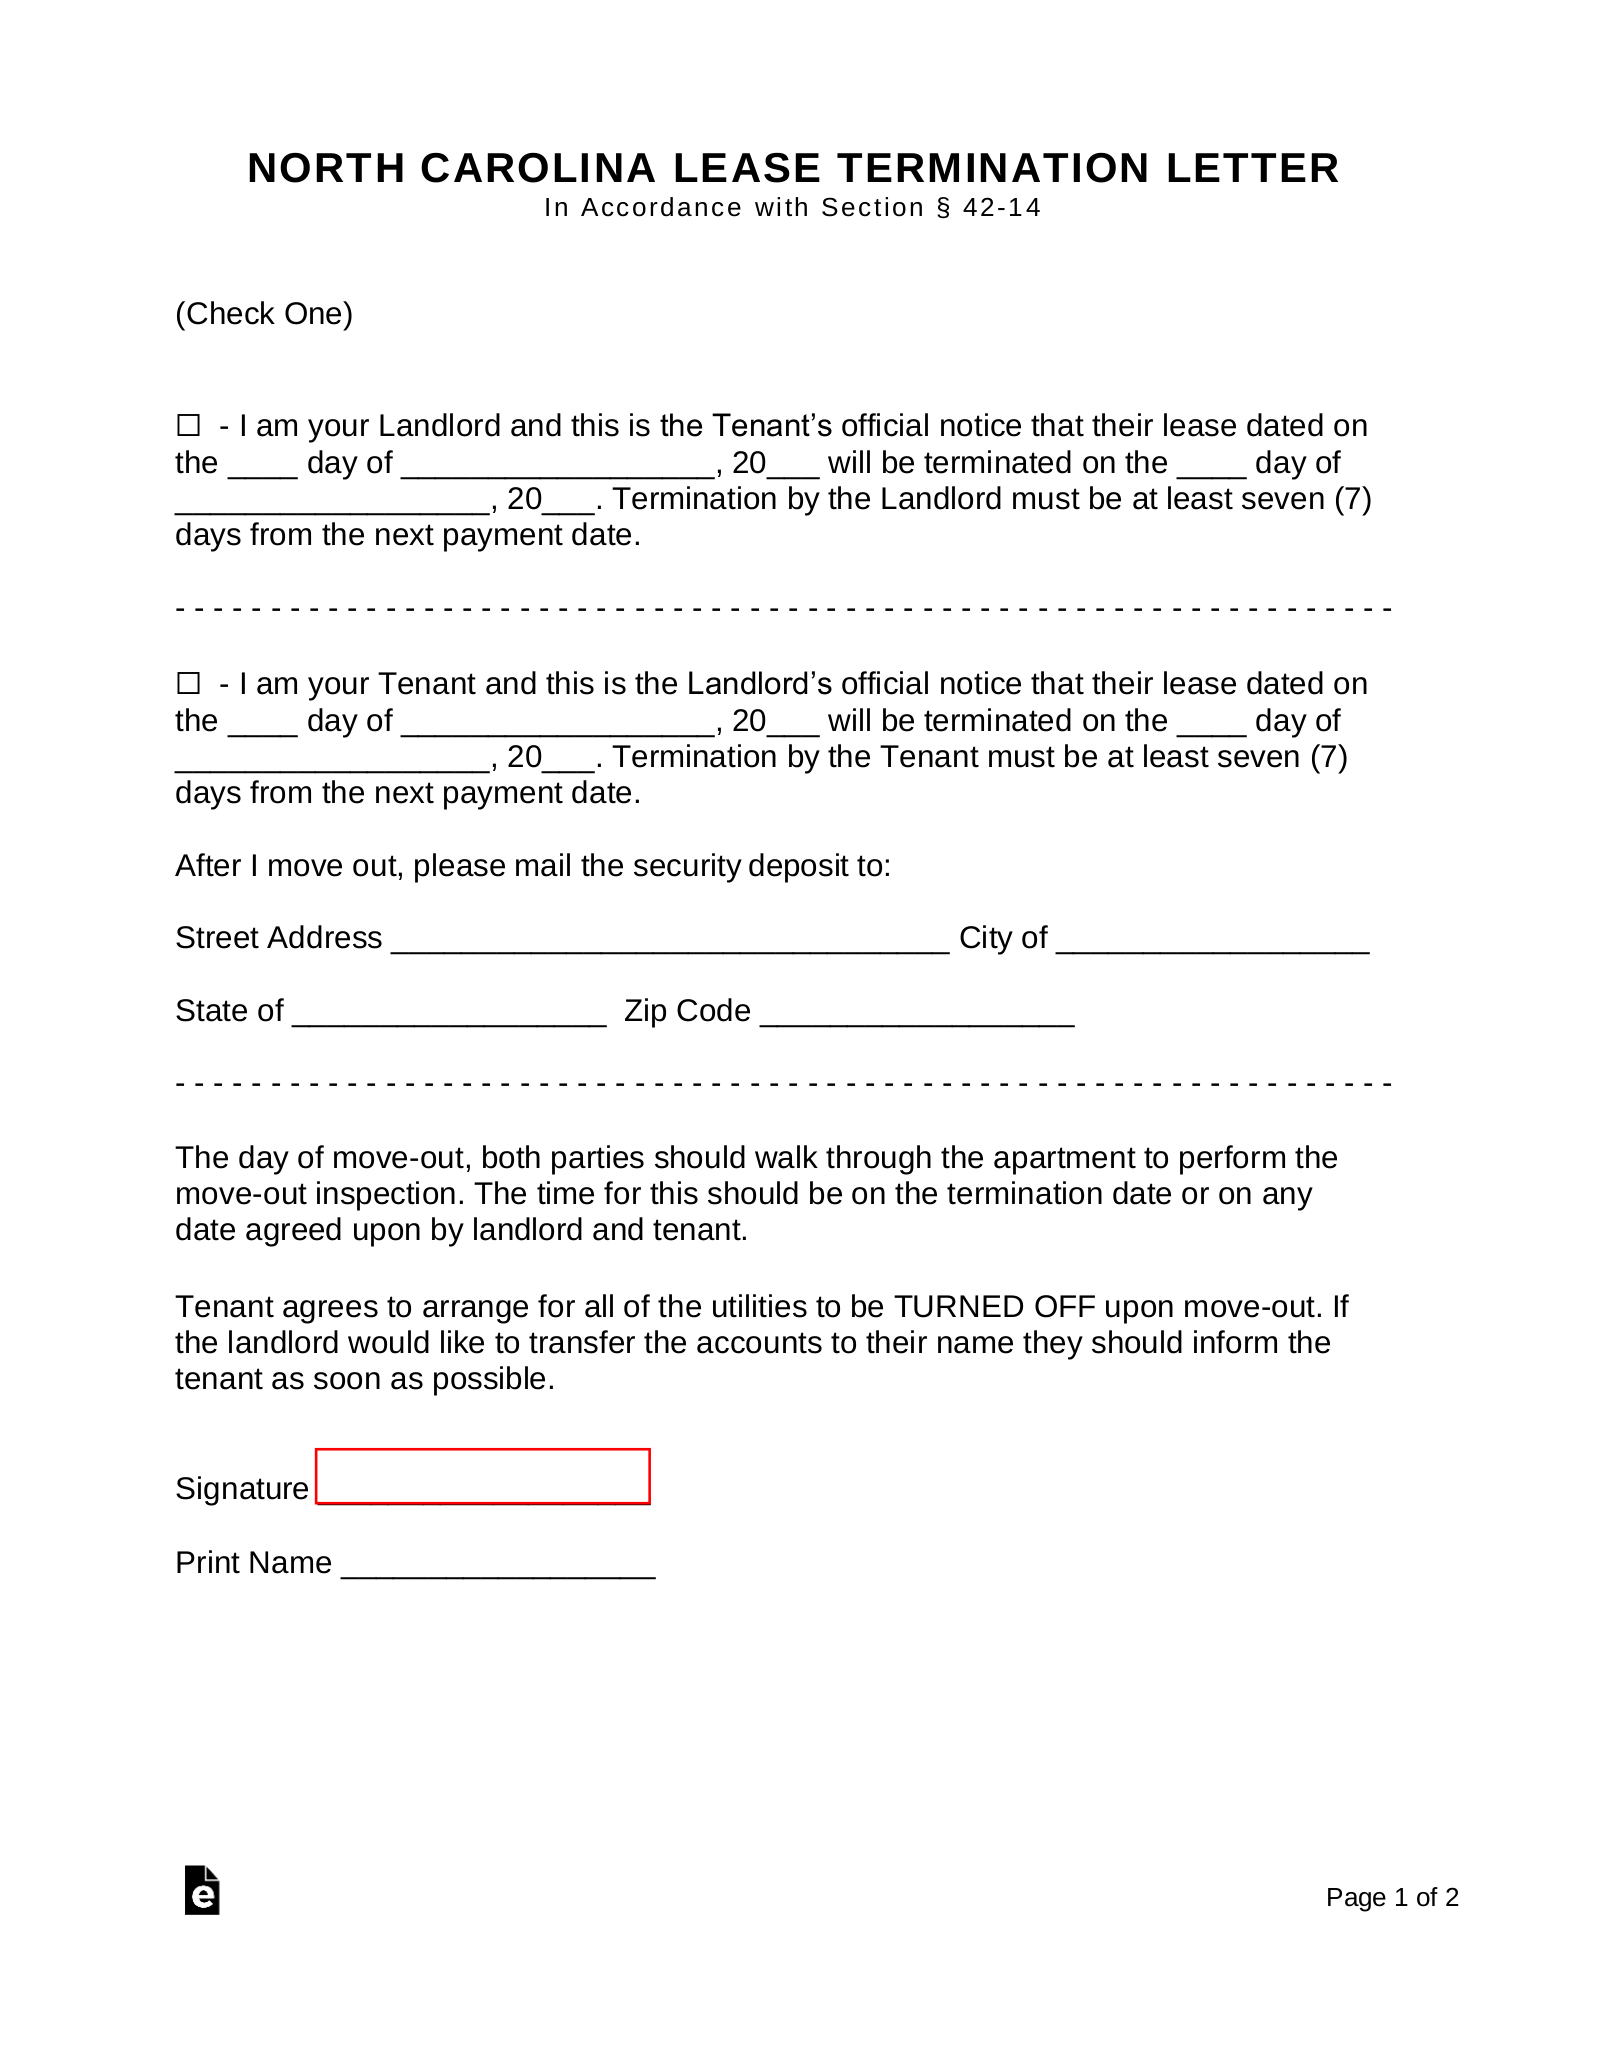 North Carolina Lease Termination Letter Form | 7-Day Notice